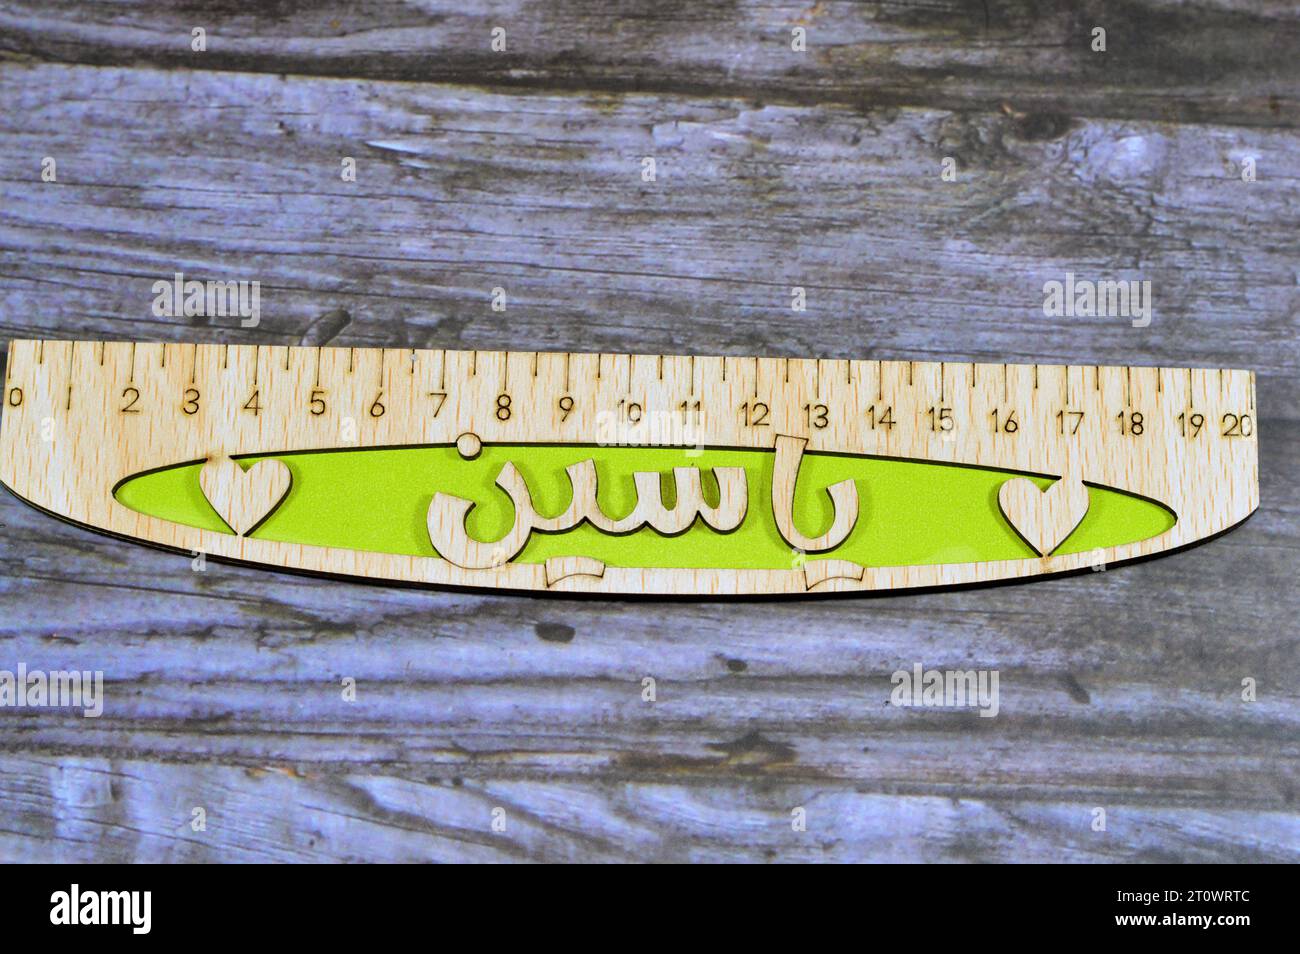 Translation of Arabic name on the ruler (Yassin), Arabian common names on wooden rulers, a rule, line gauge, instrument used to make length measuremen Stock Photo